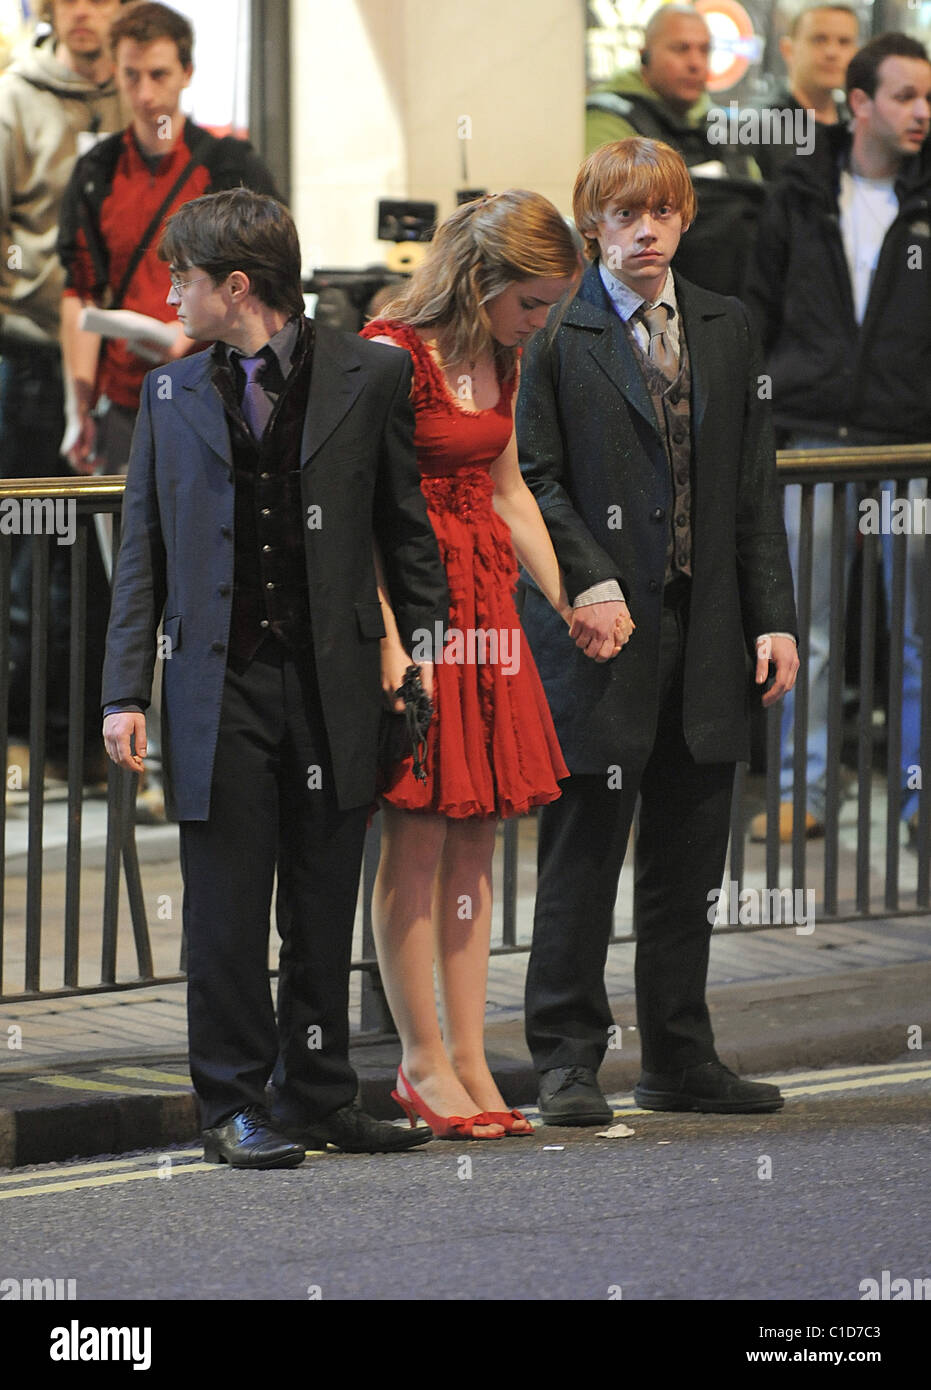 Daniel Radcliffe, Emma Watson and Rupert Grint bring the West End to a standstill as they film scenes for the last movie in the Stock Photo